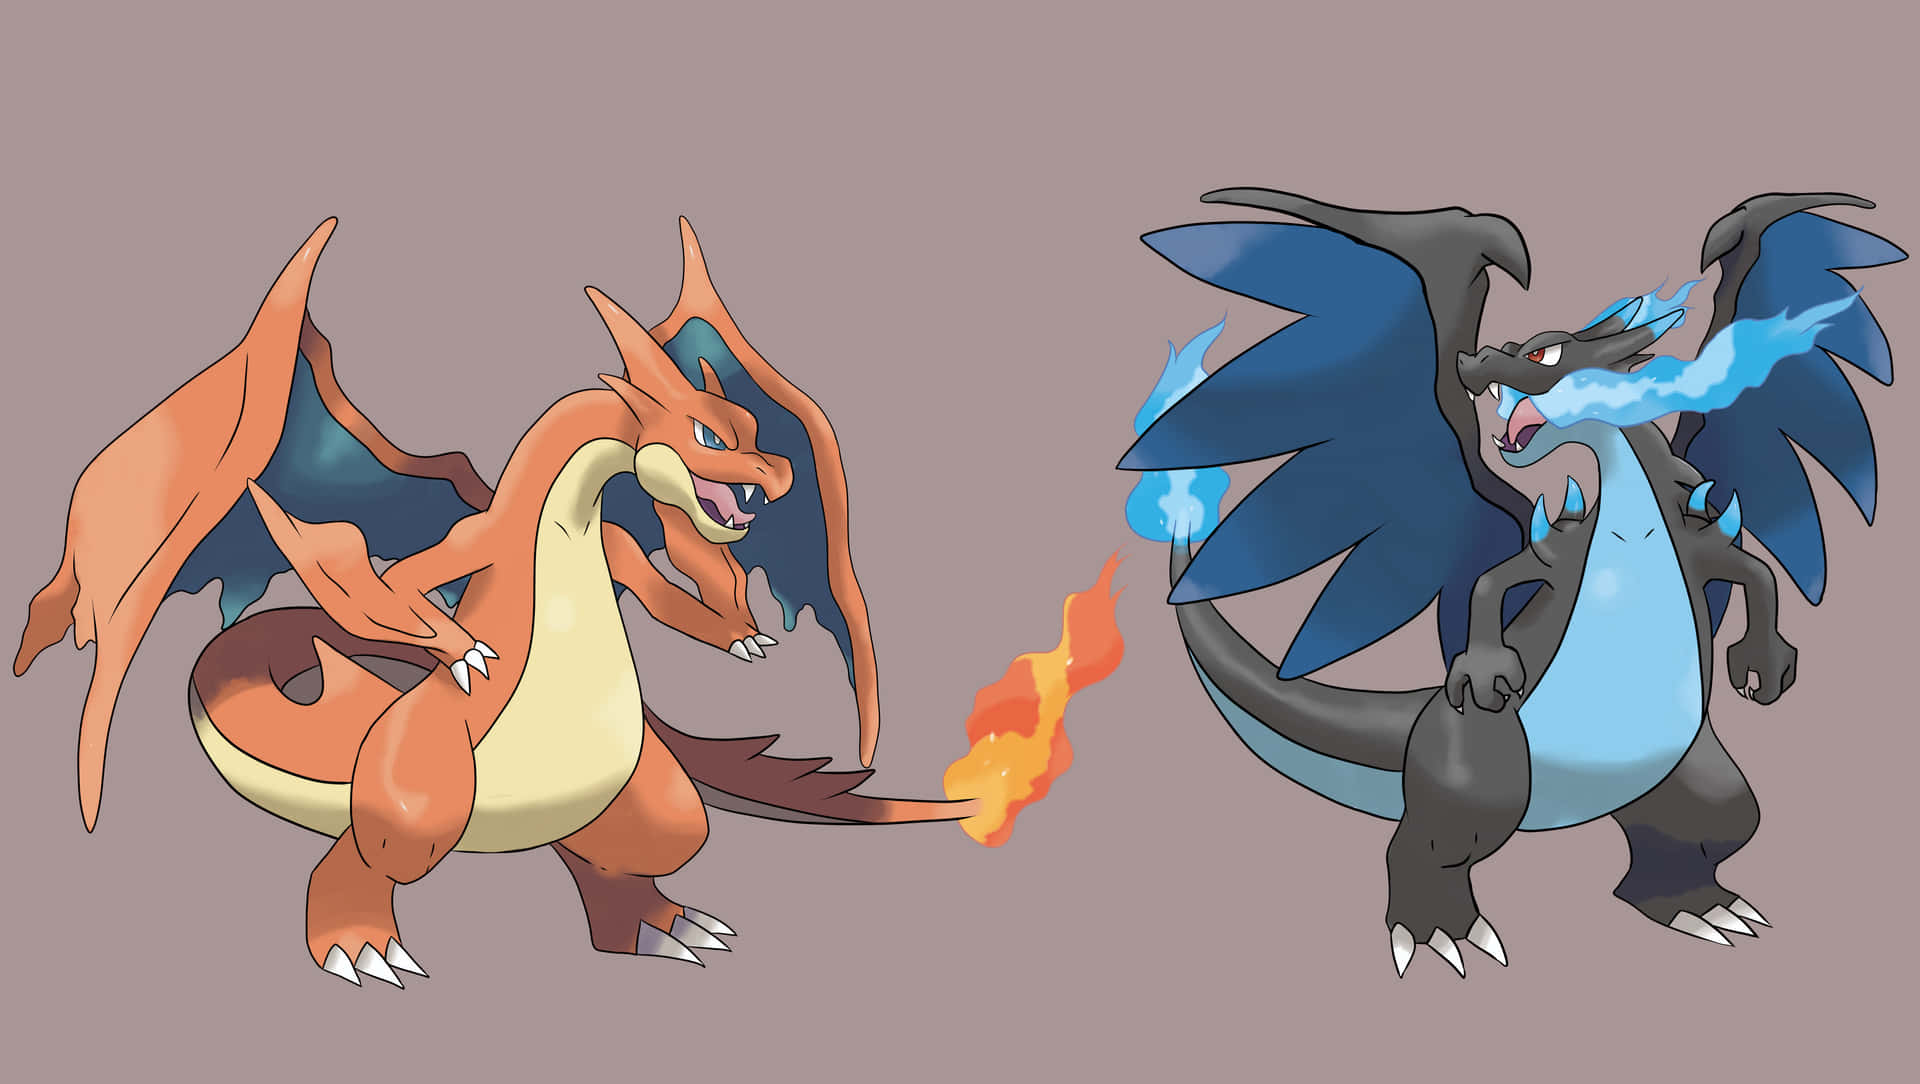 "Witness the Flames of a Legendary Charizard!" Wallpaper